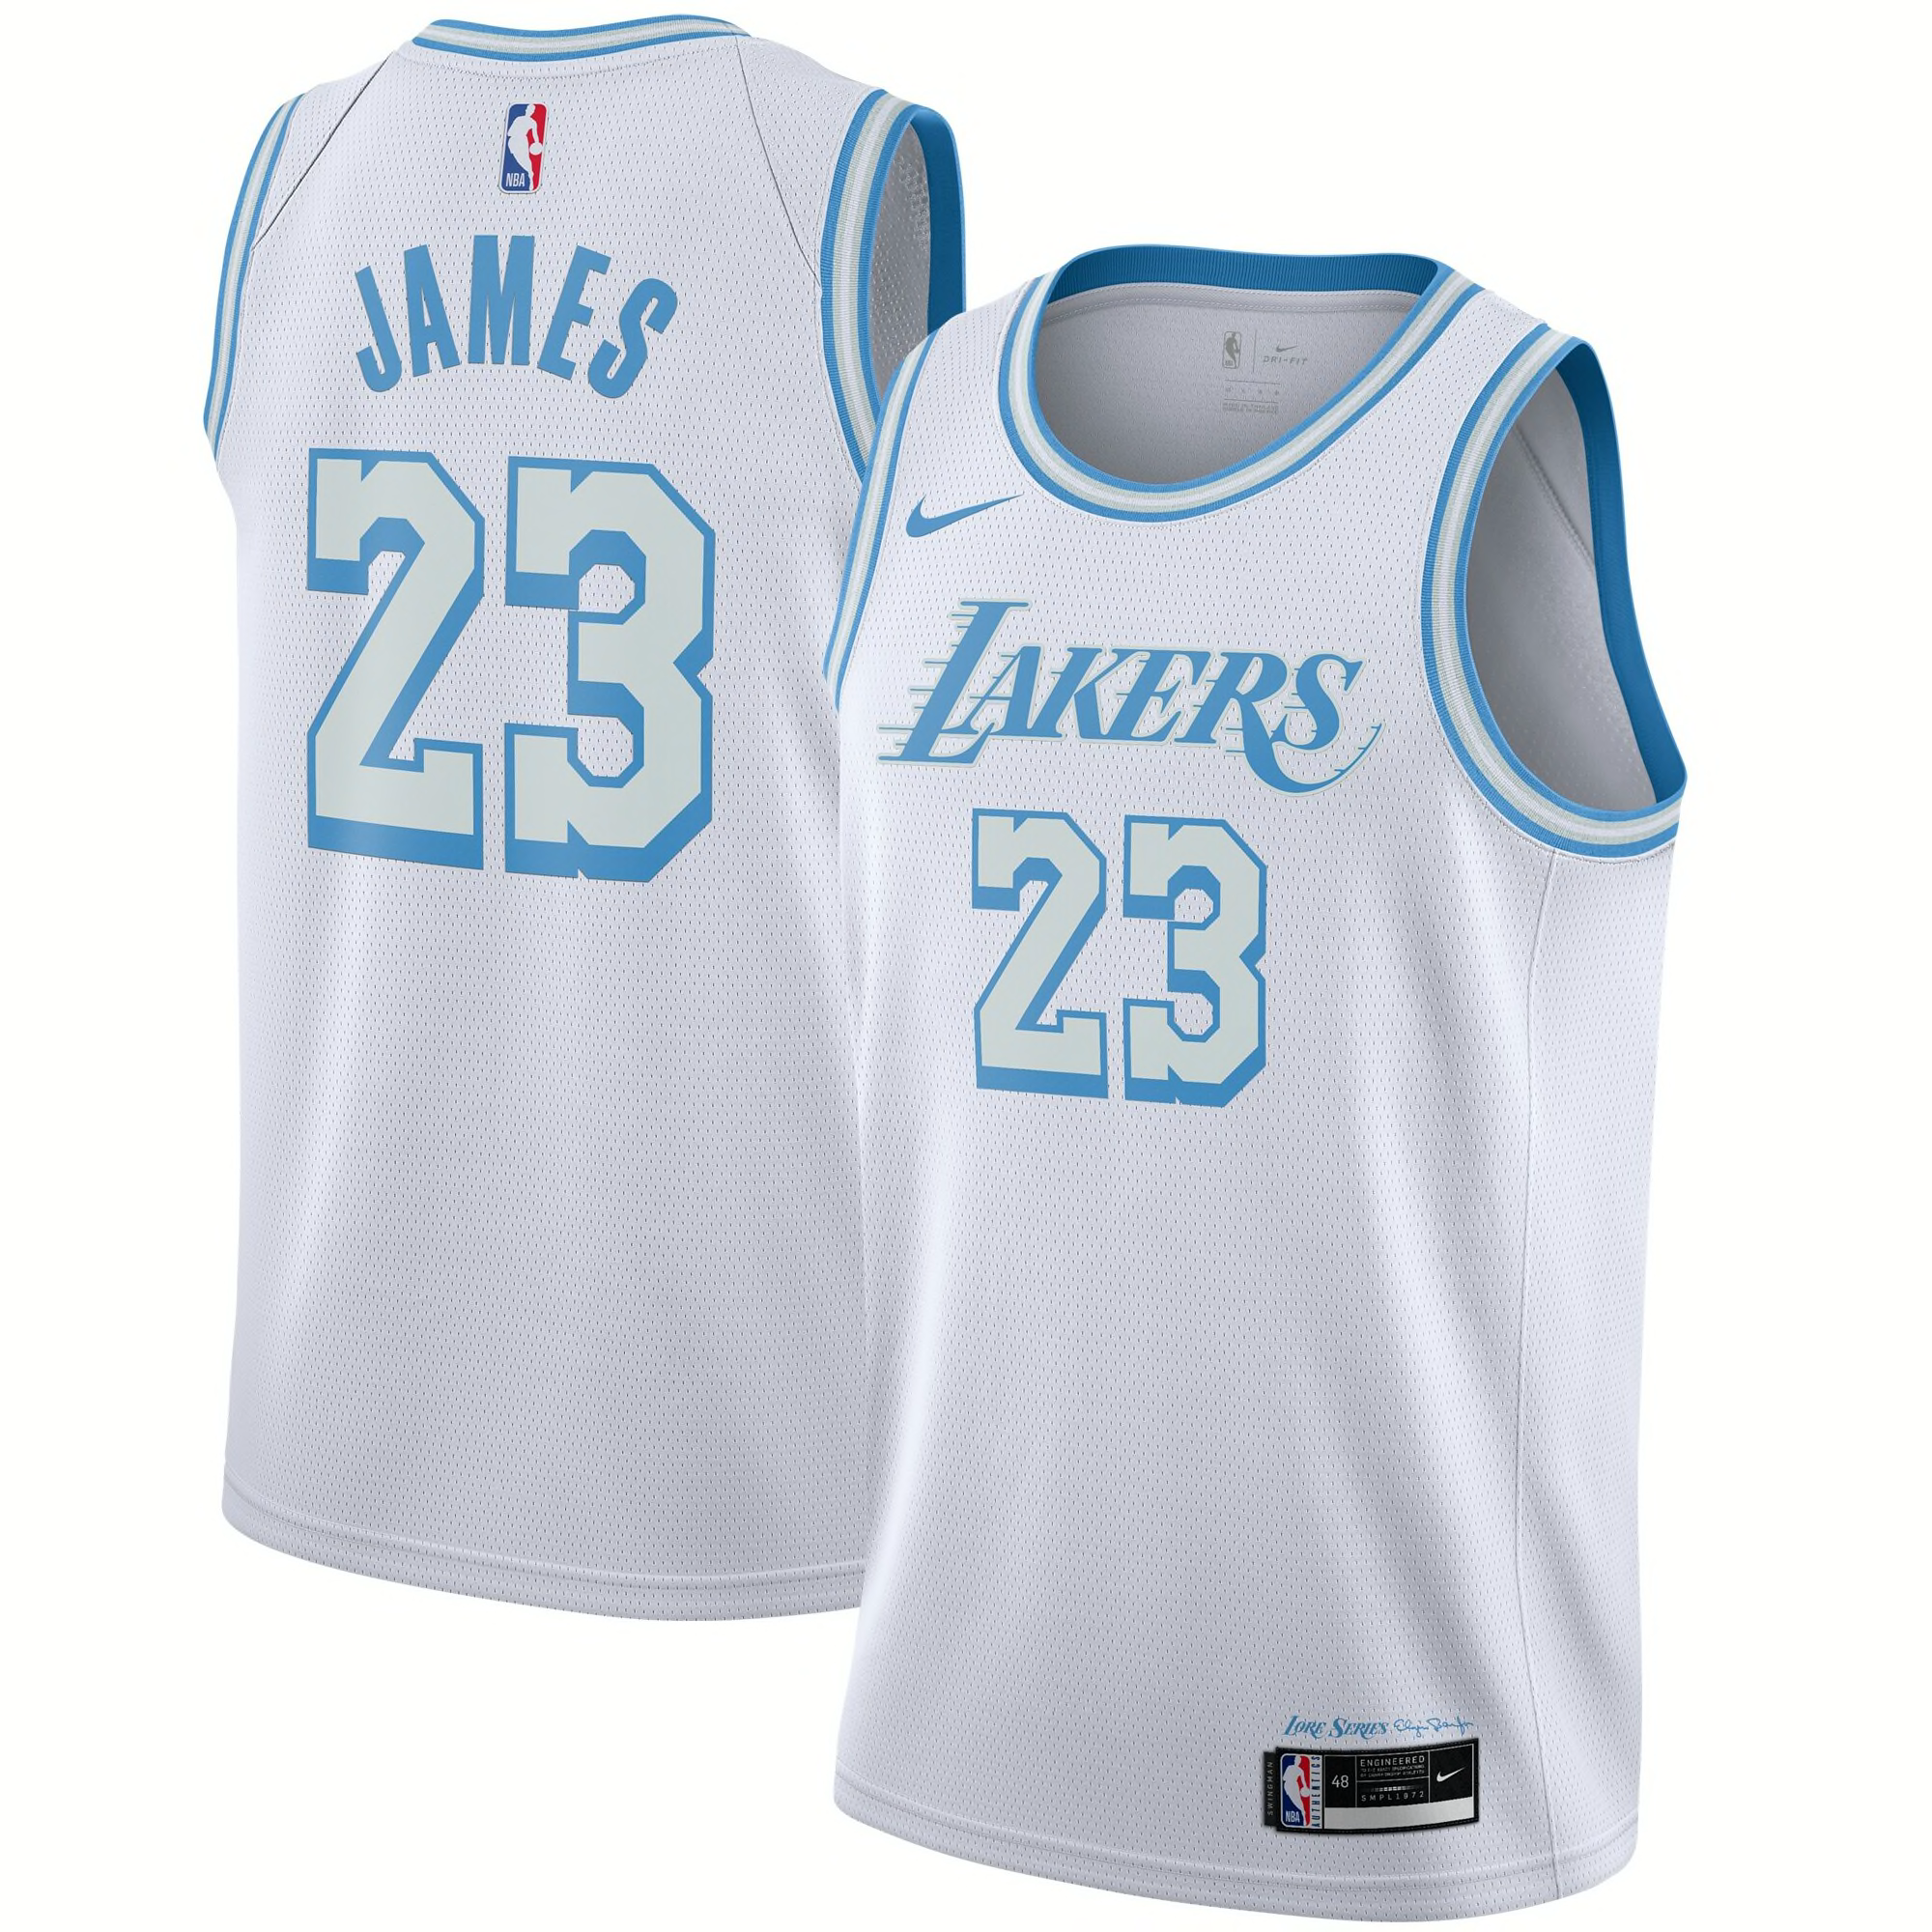 Order the amazing Los Angeles Lakers 